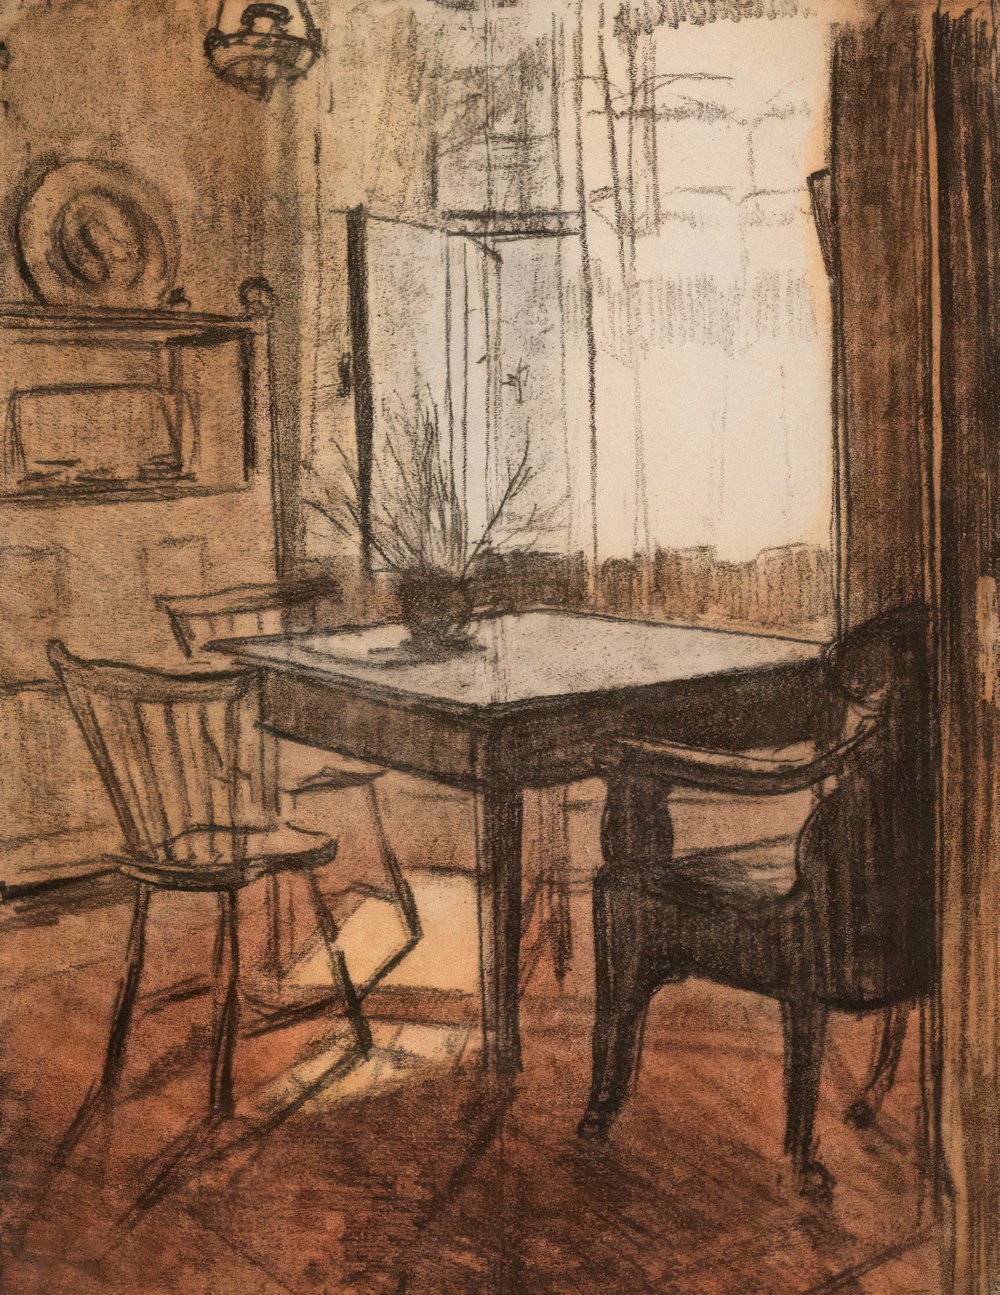 a drawing of a table and chairs in a room